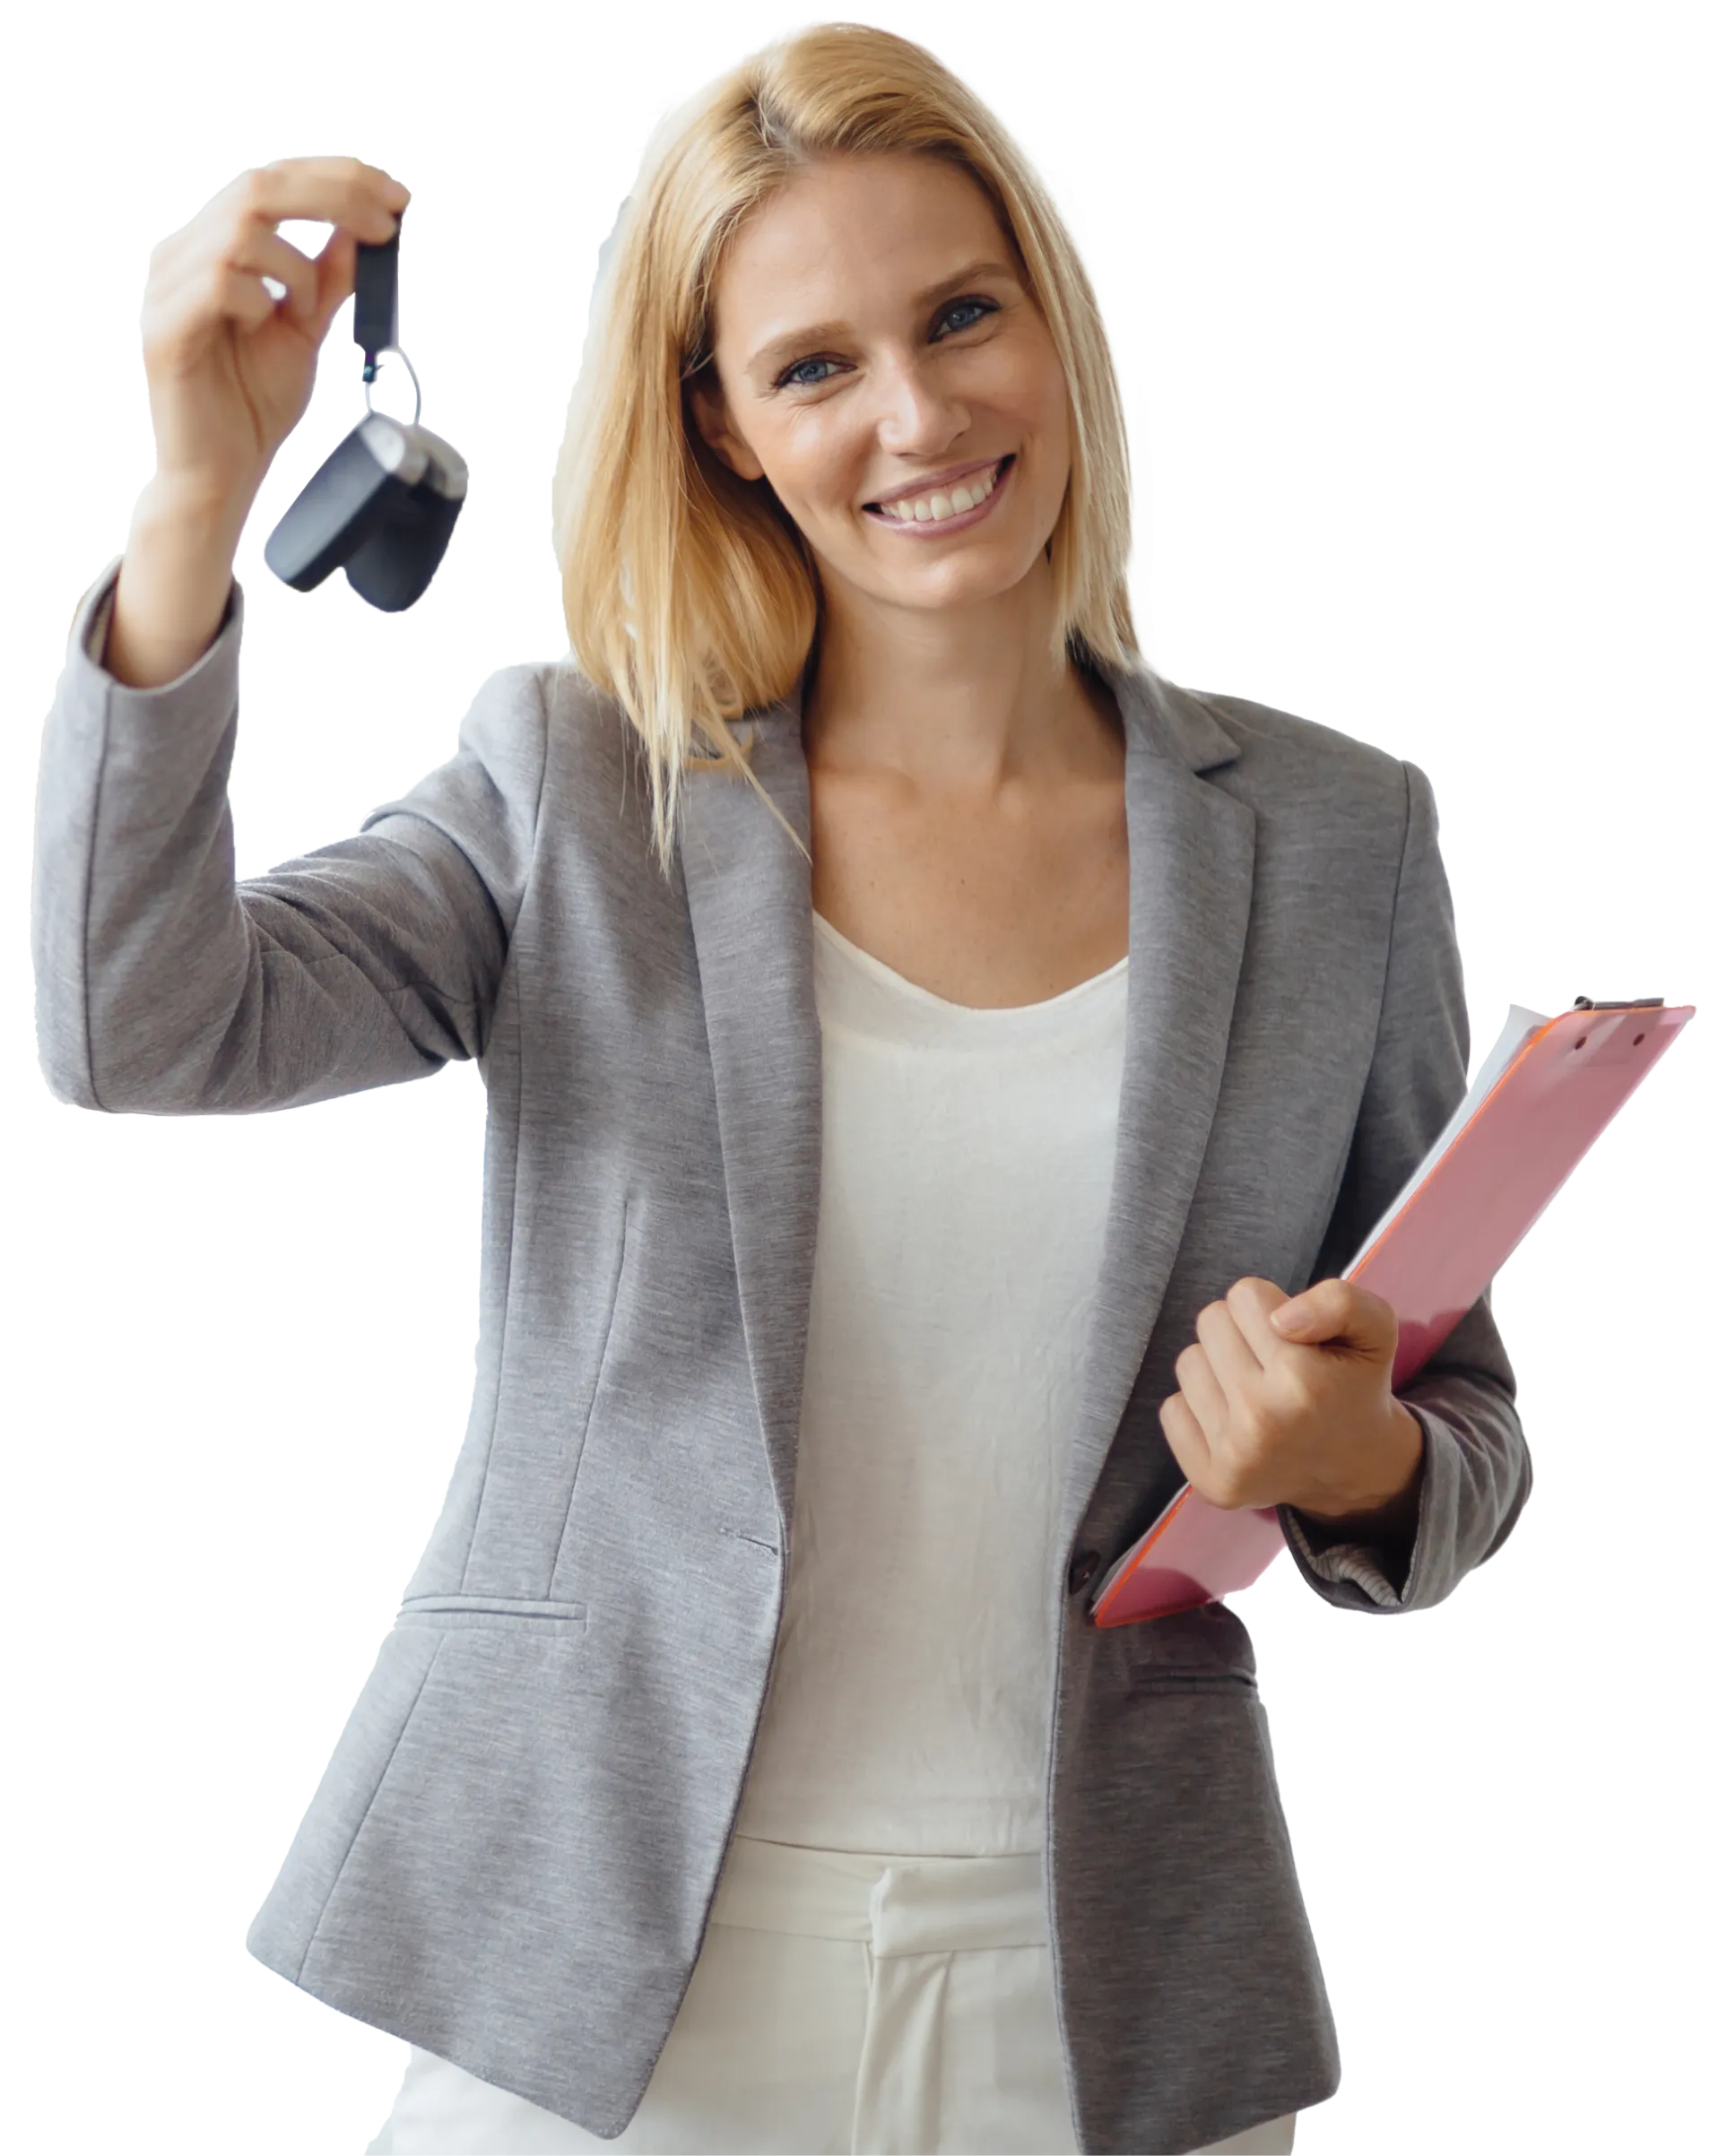 Woman smiling and holding up keys